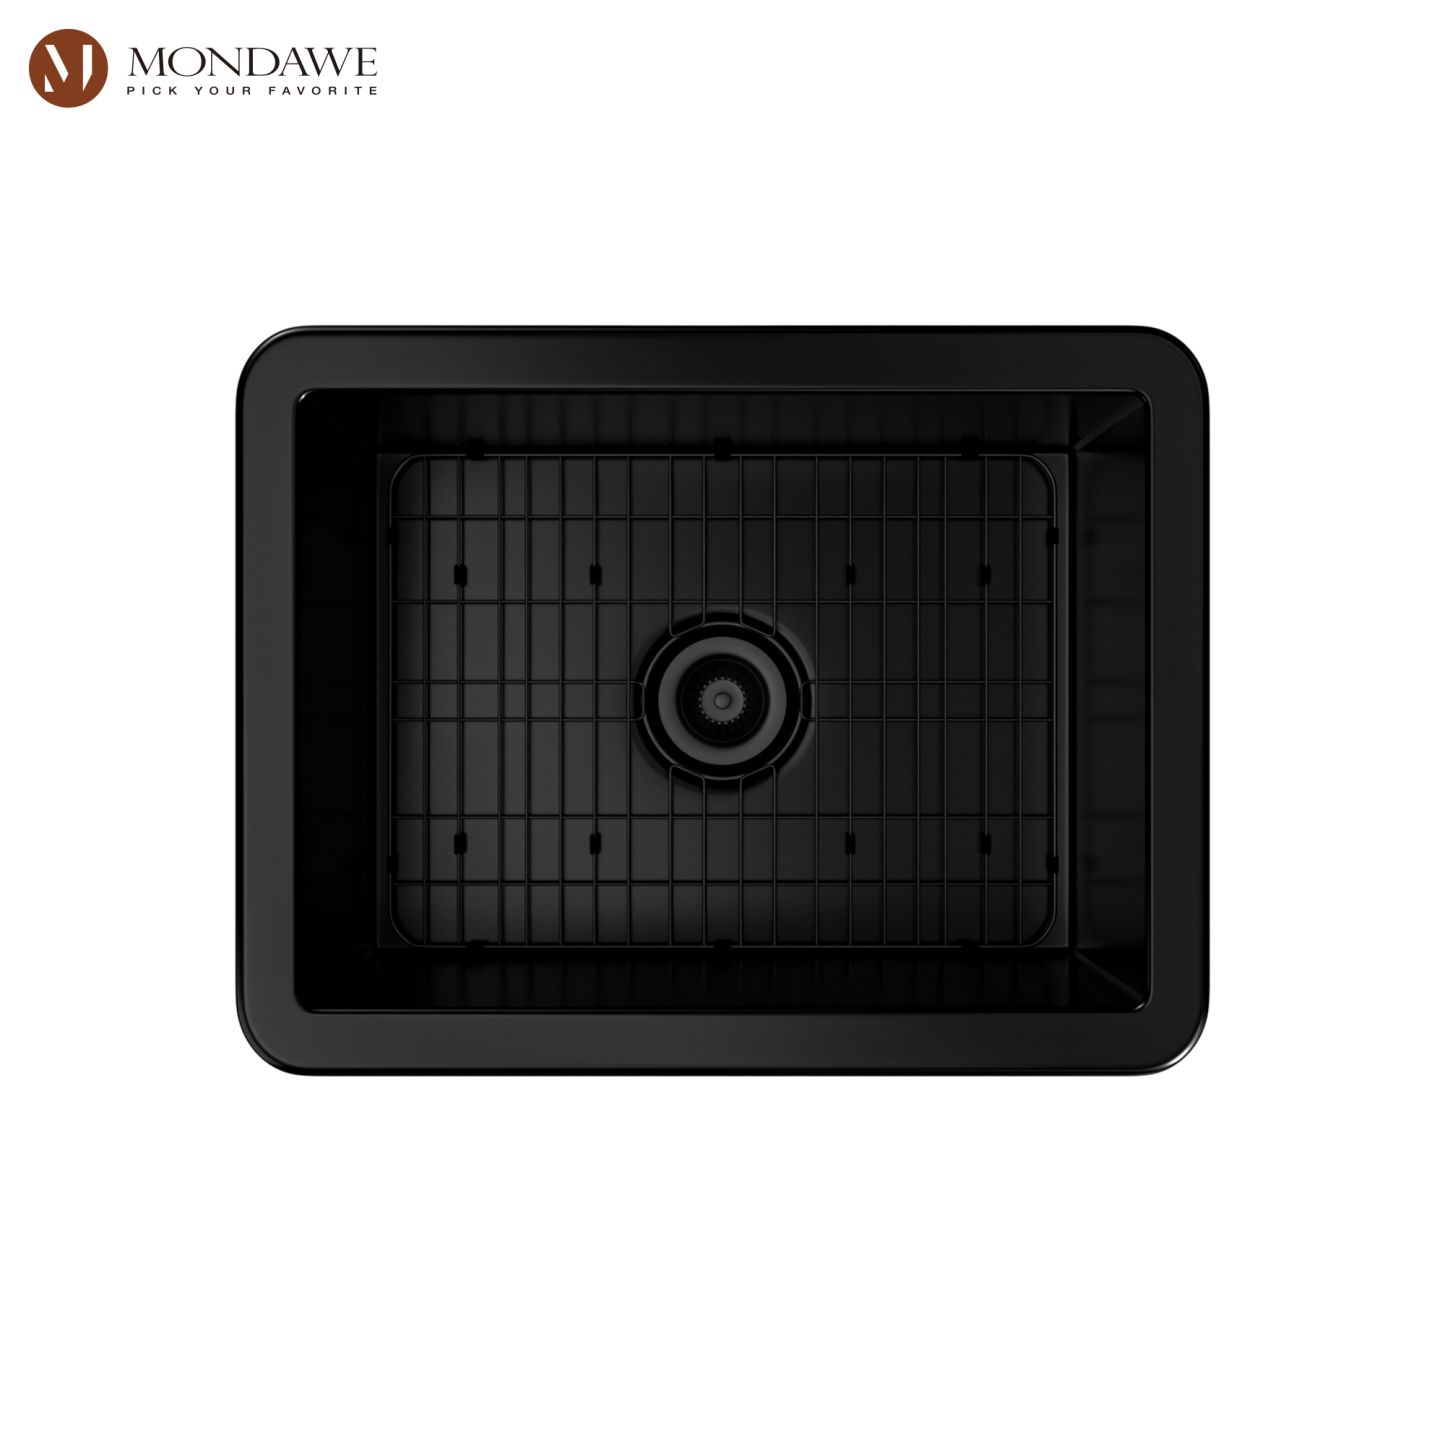 Undermount 24 in. matte black single bowl fireclay kitchen sink comes with high-arc kitchen faucet-Mondawe